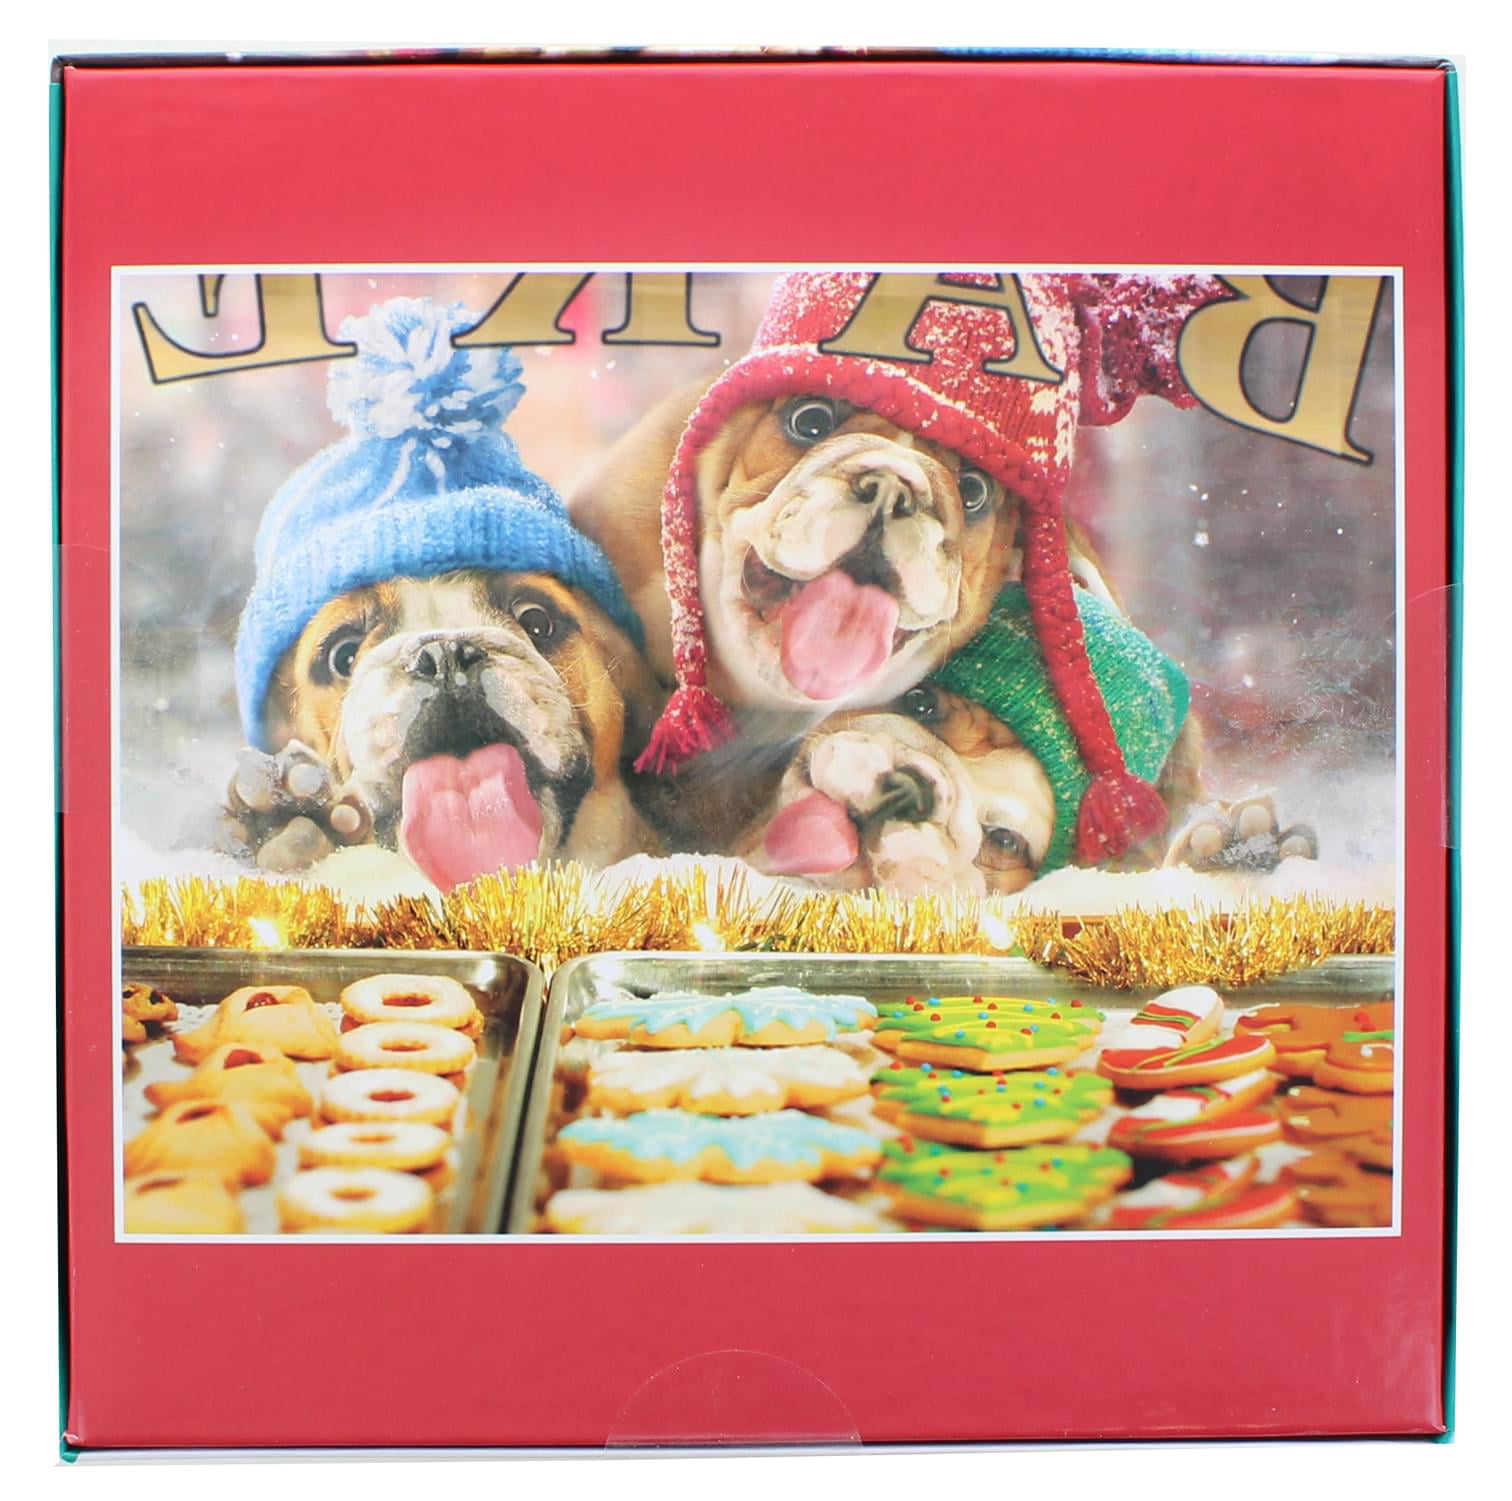 Ceaco Avanti Christmas Holiday Window Shopping Bulldog Puzzle 550 PC for sale online